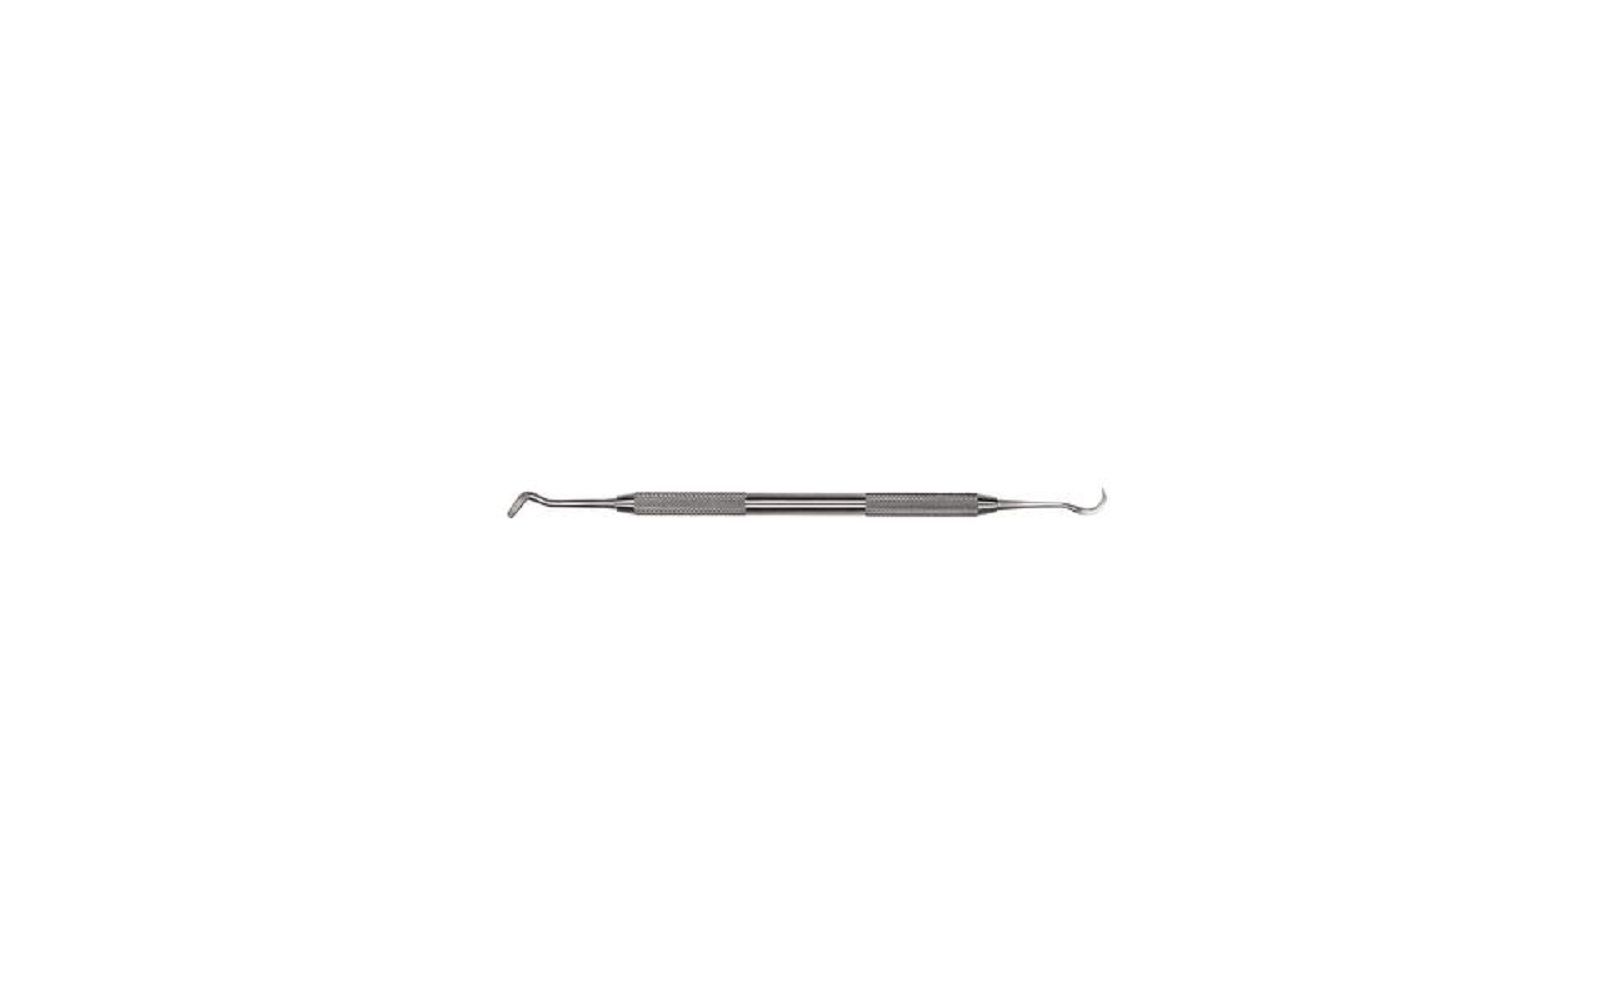 Orthodontic band pusher with short tip & scaler, double end